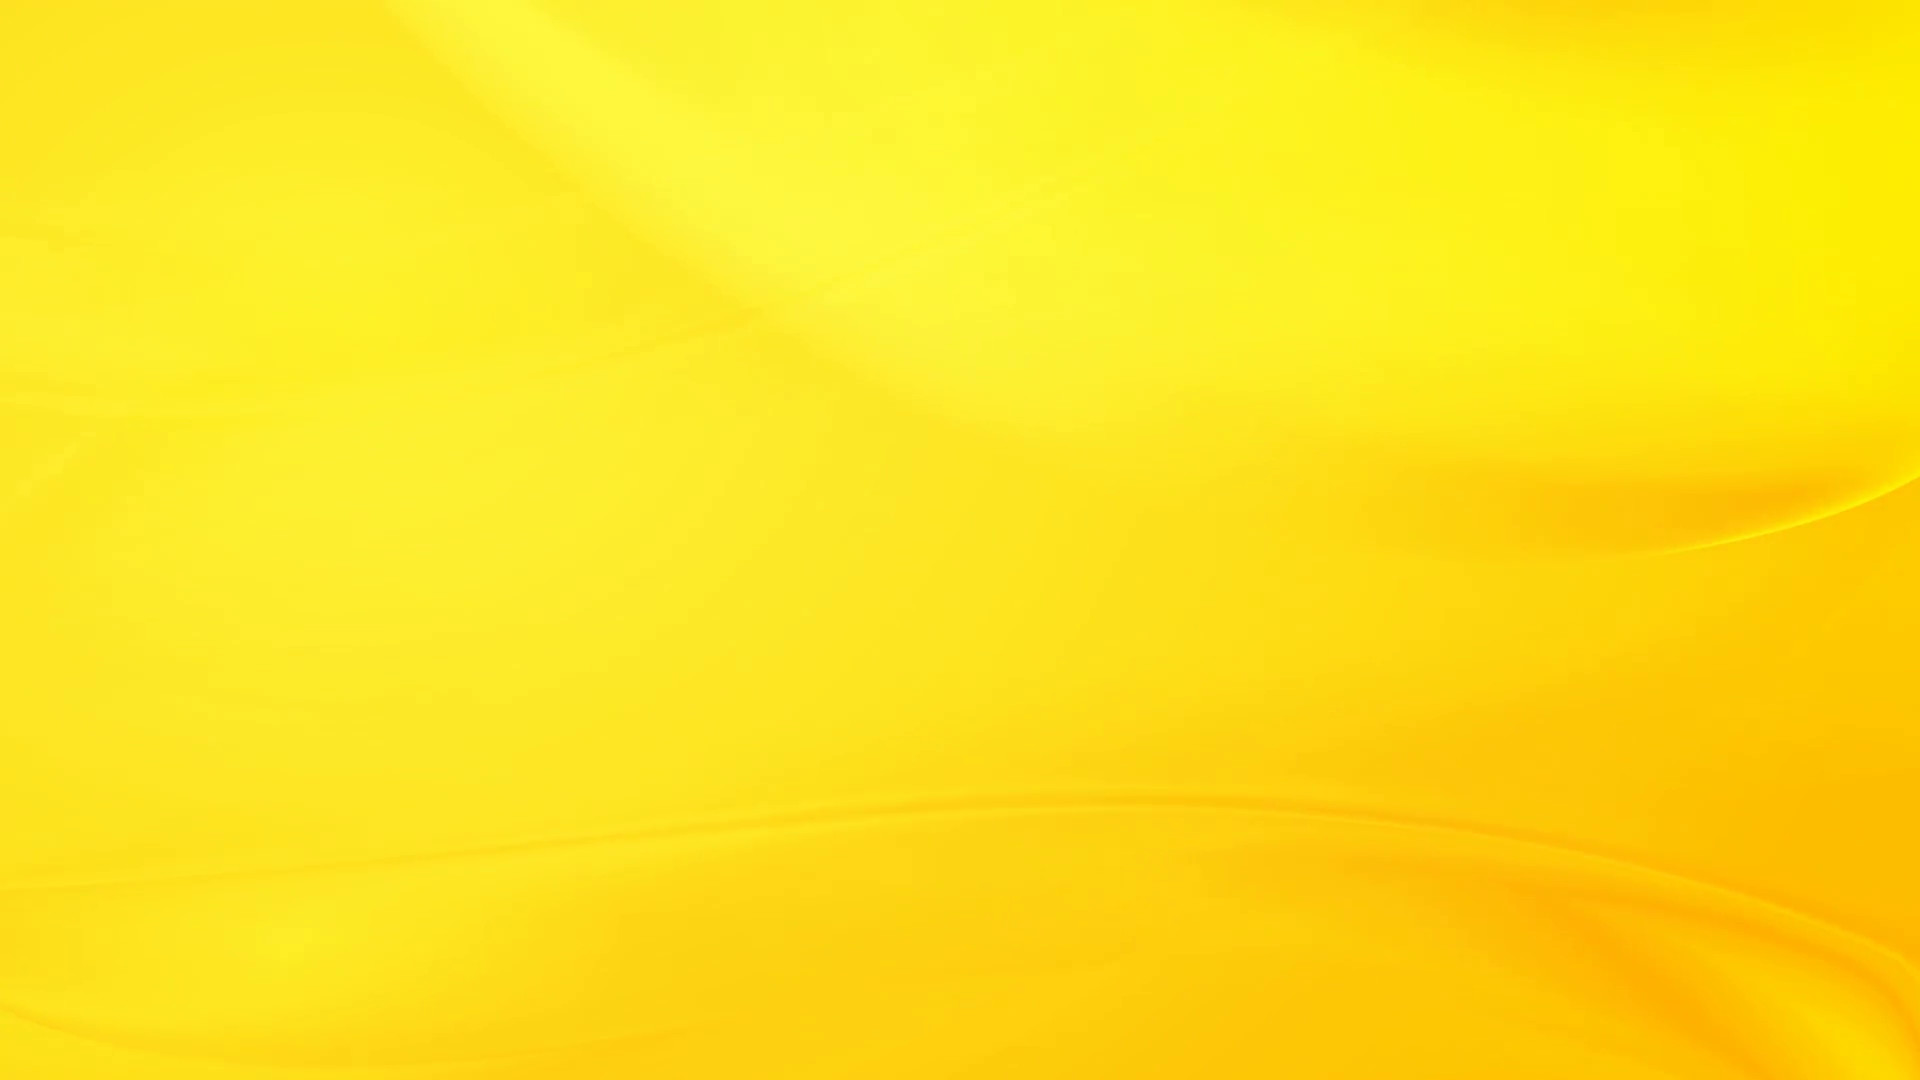 1920x1080, Yellow Wallpapers - Yellow Background Hd - 1920x1080 Wallpaper -  